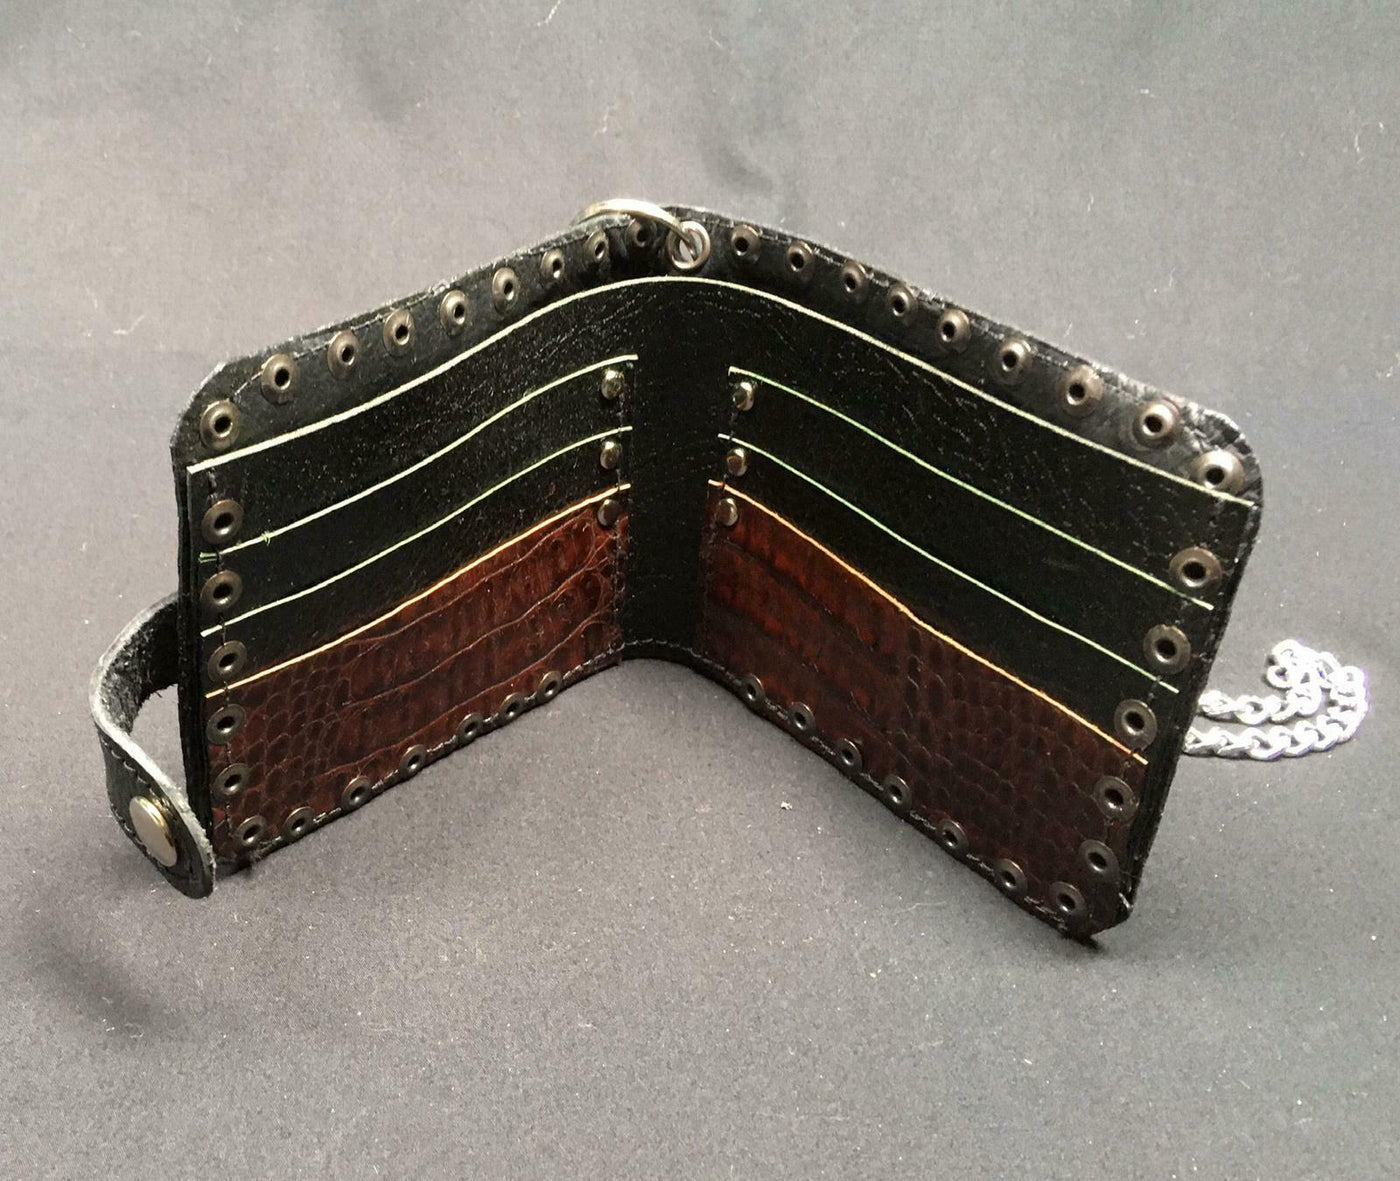 Iron Cross Genuine Python and Sea Snake Skin Leather Wallet